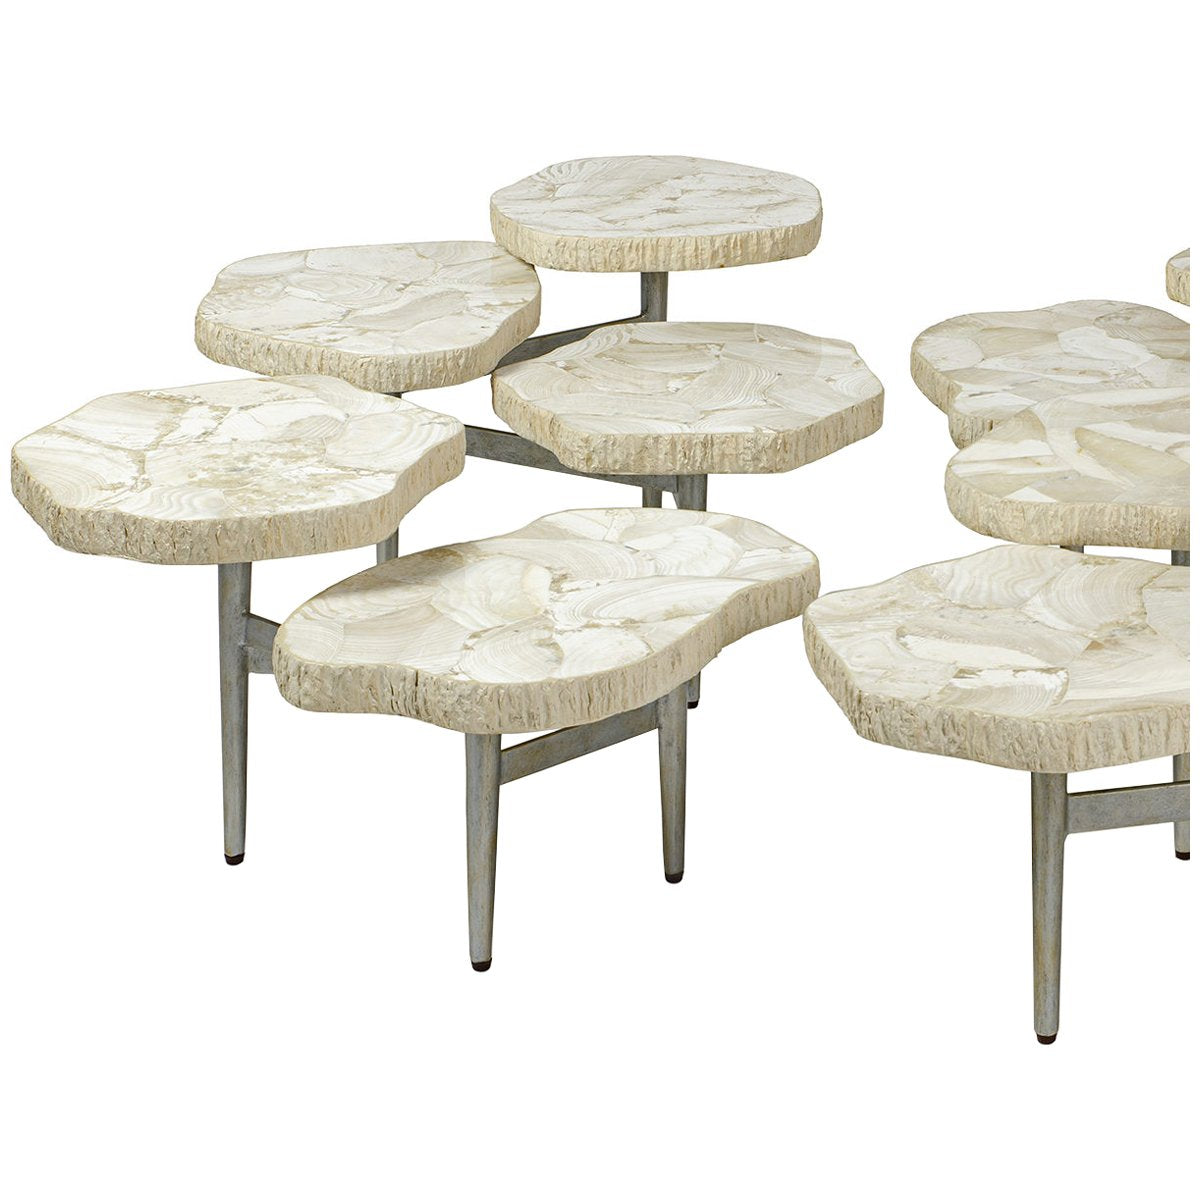 Palecek Merced Fossilized Clam 2-Top Table